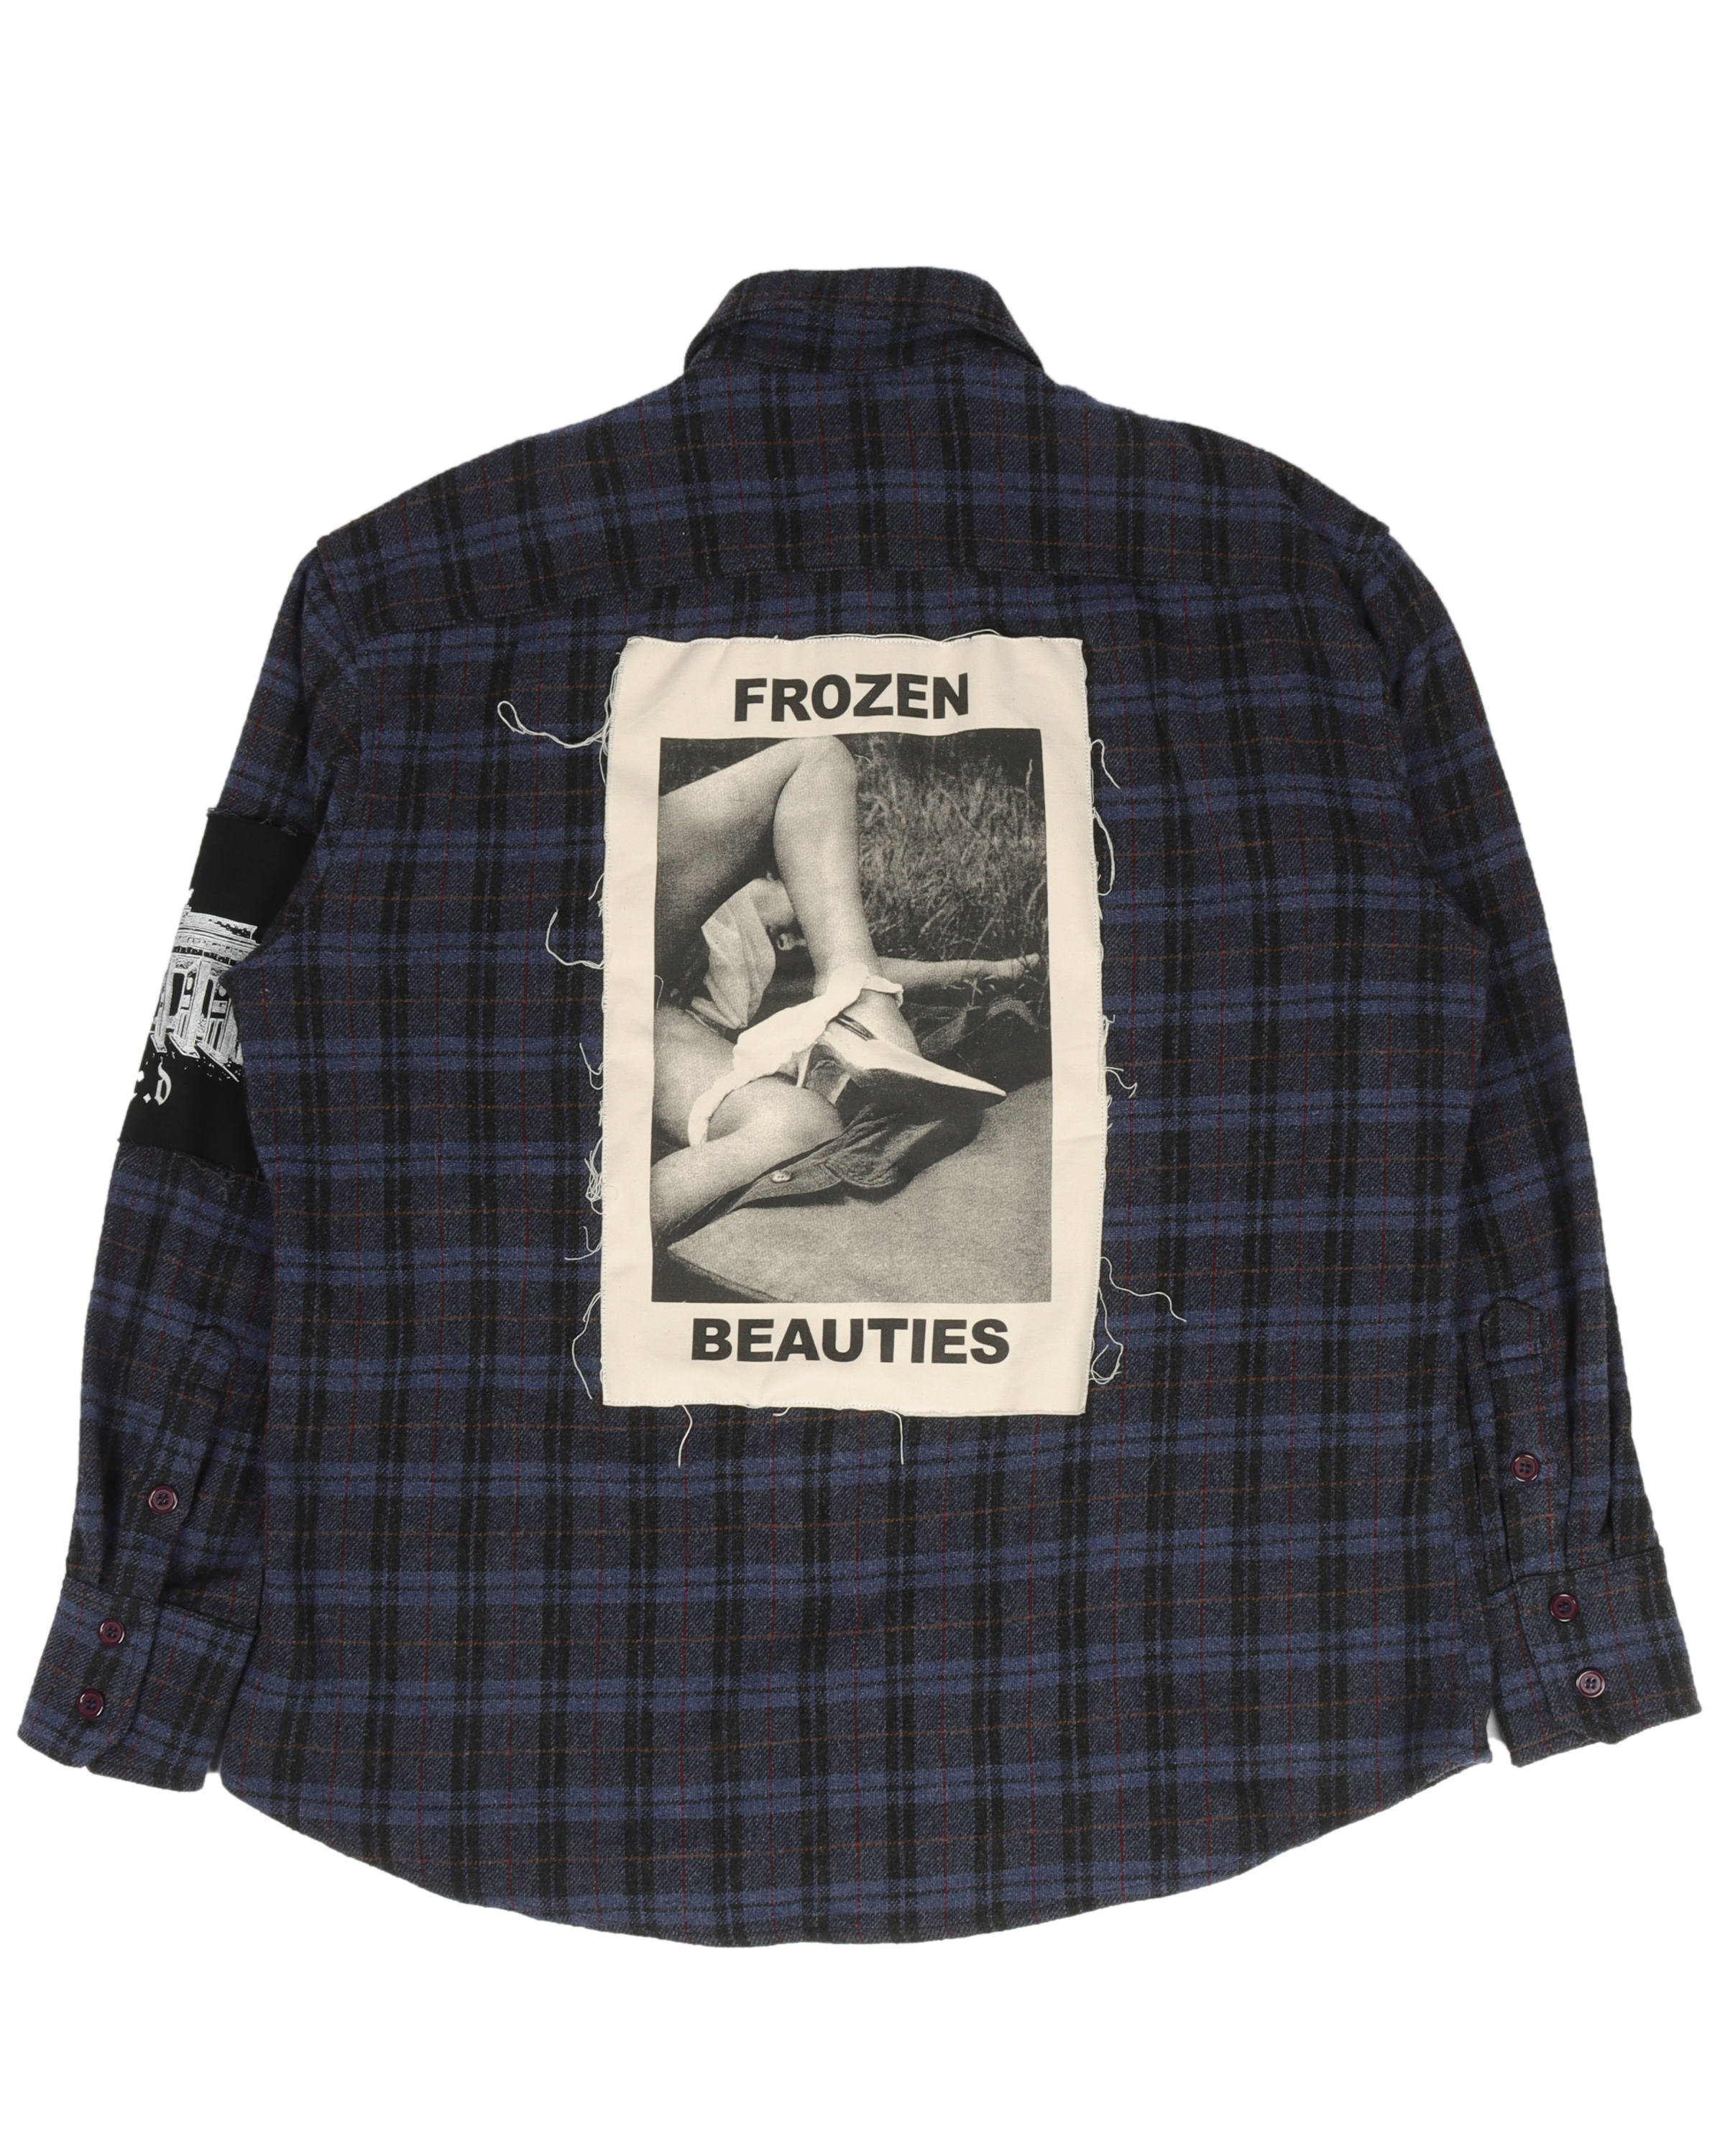 "Frozen Beauties" Patched Wool Flannel Shirt